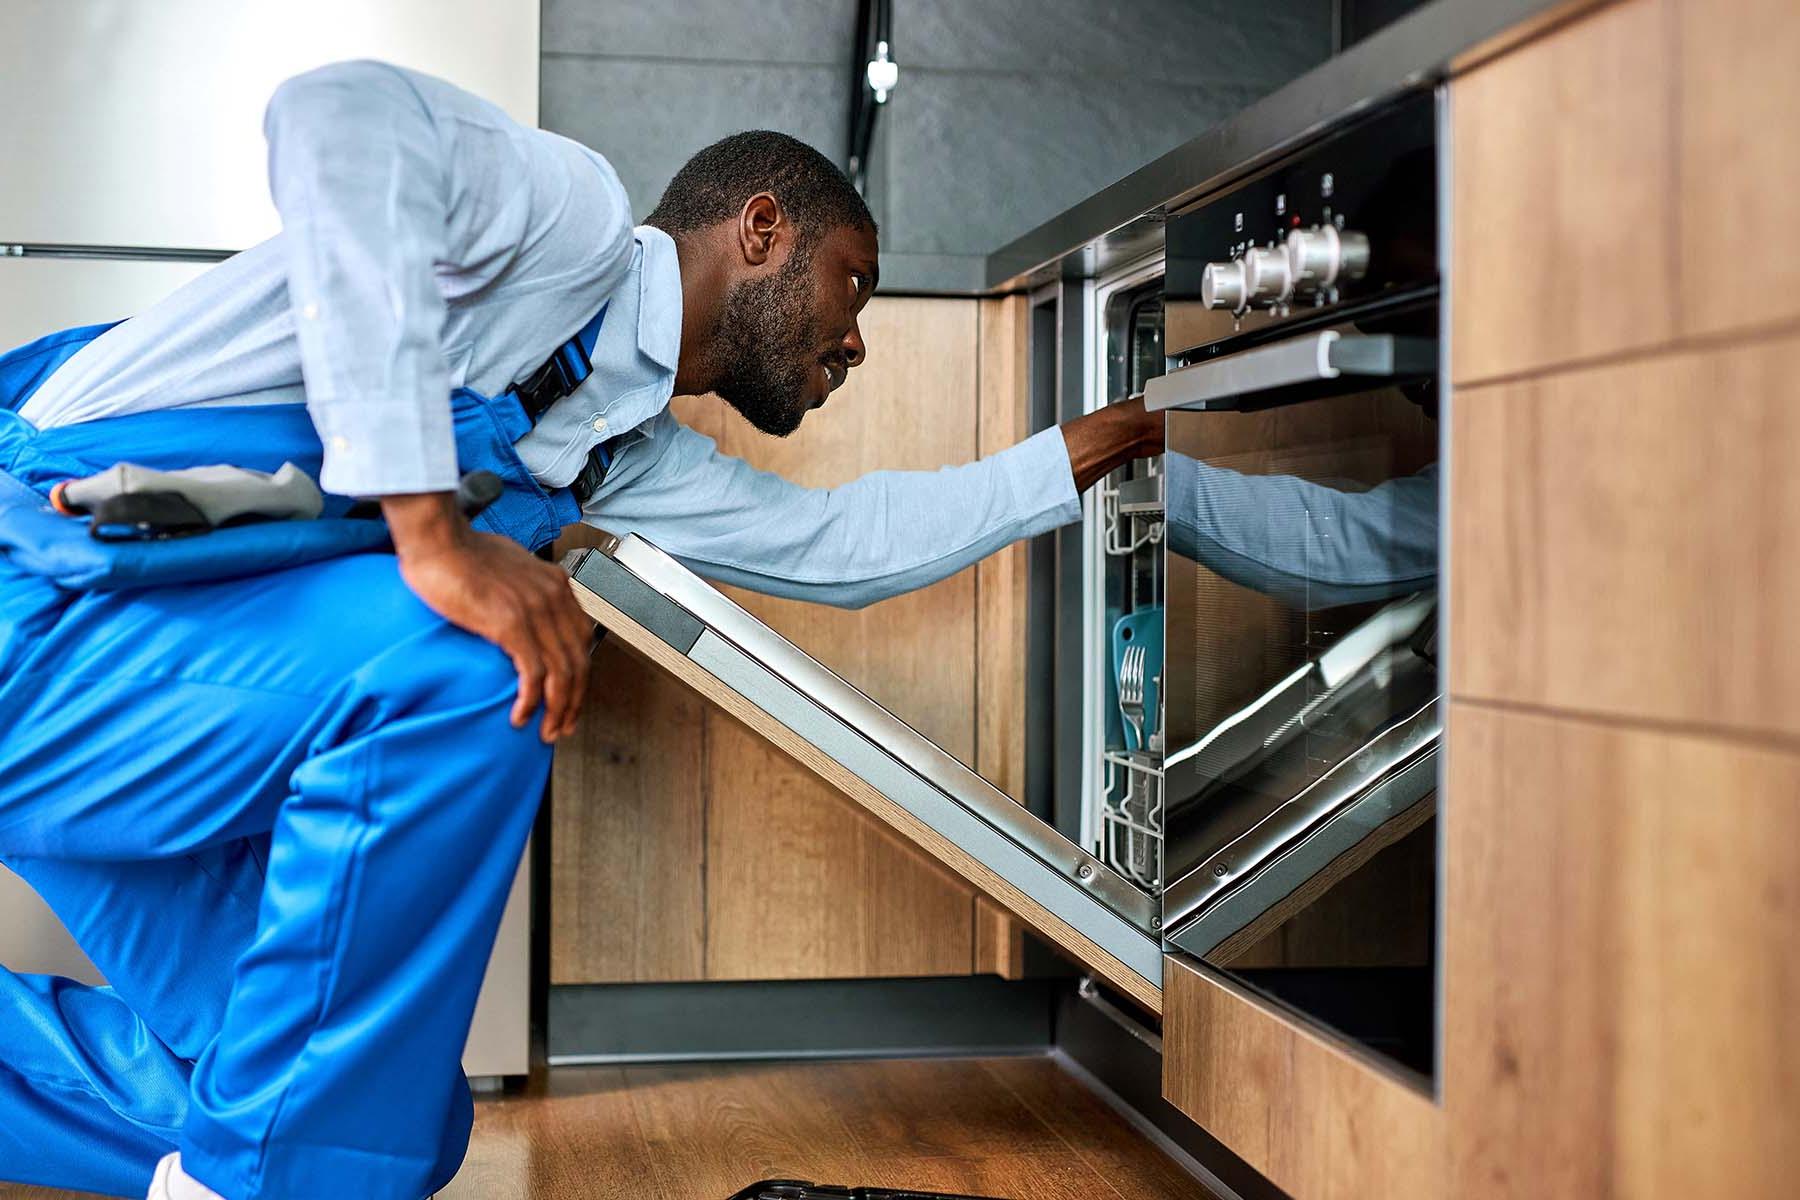 A technician in blue overalls inspects a dishwasher.